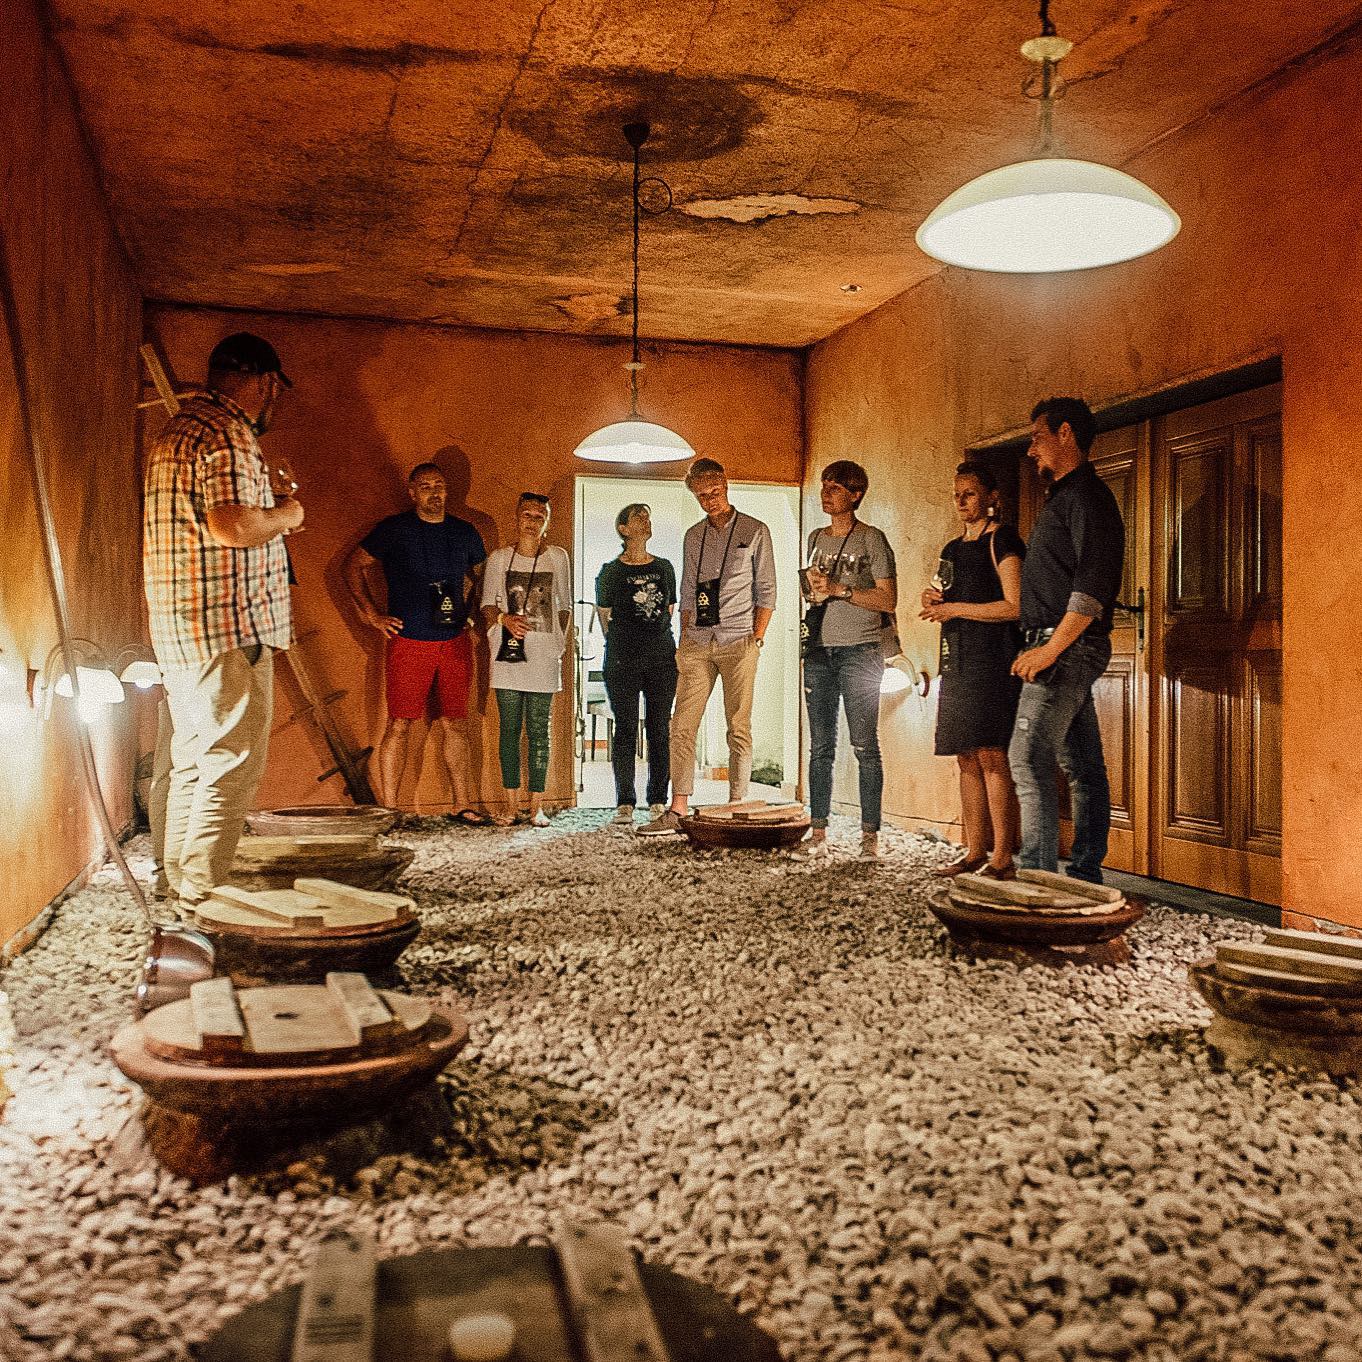 A group at a wine tasting in a dimly lit wine cellar with clay amphoras buried in a local soil in Goriska Brda wine region in Slovenia